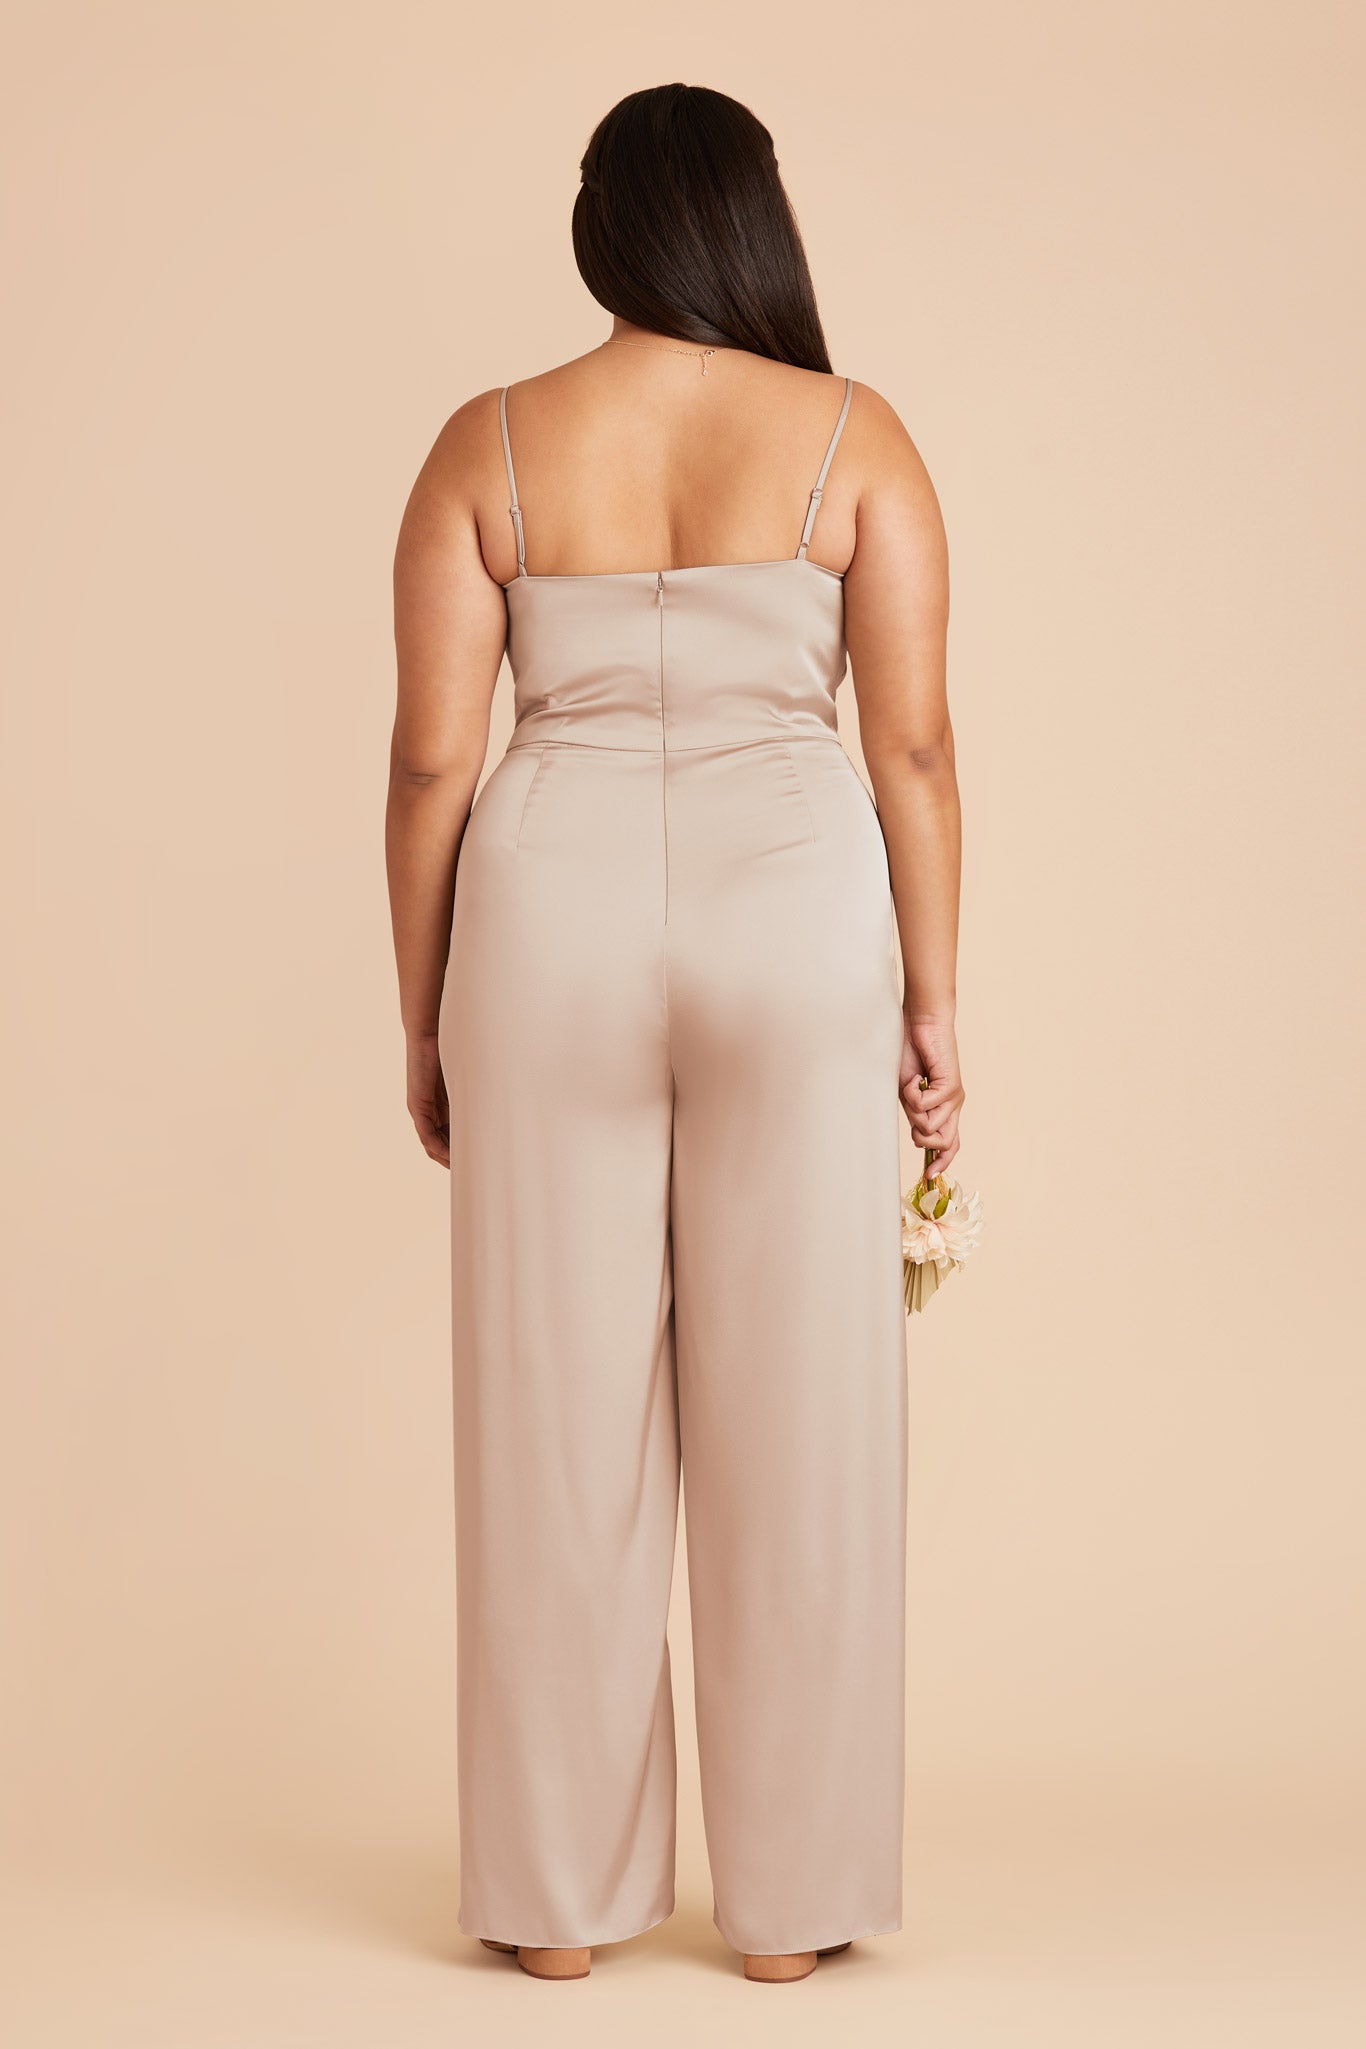 Taupe Donna Matte Satin Bridesmaid Jumpsuit by Birdy Grey